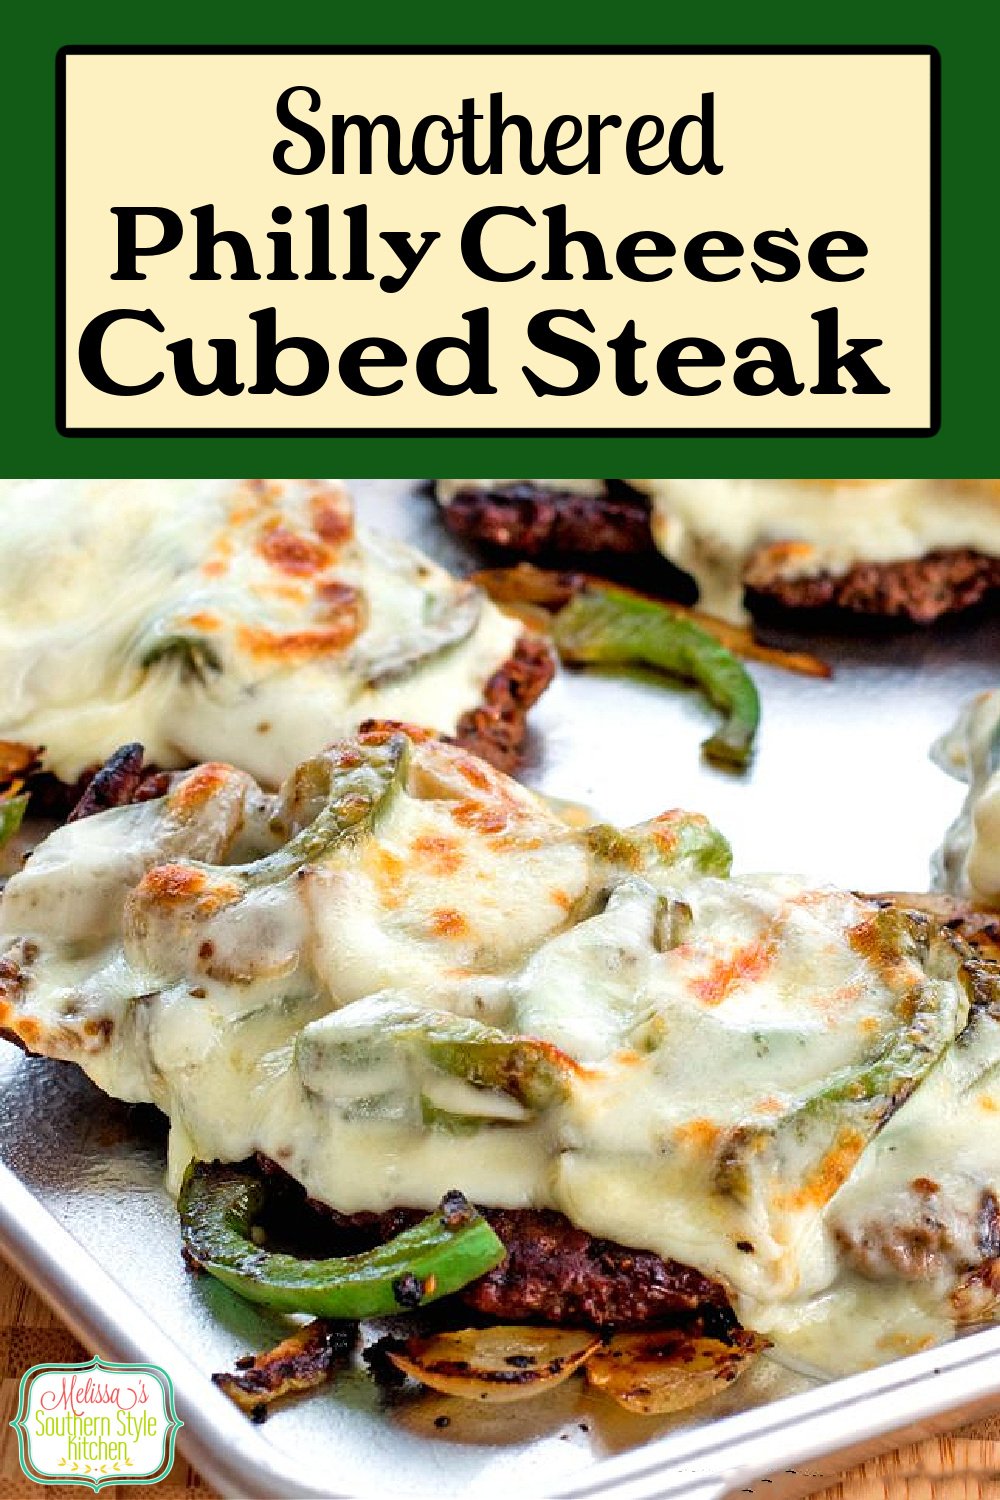 Gooey Smothered Philly Cheese Cubed Steak topped with sweet onions, bell peppers and melted cheese #cheesesteaks #cubesteak #phillycheesesteak #lowcarbrecipes #lowcarb #beef #easyrecipes #southernrecipes via @melissasssk